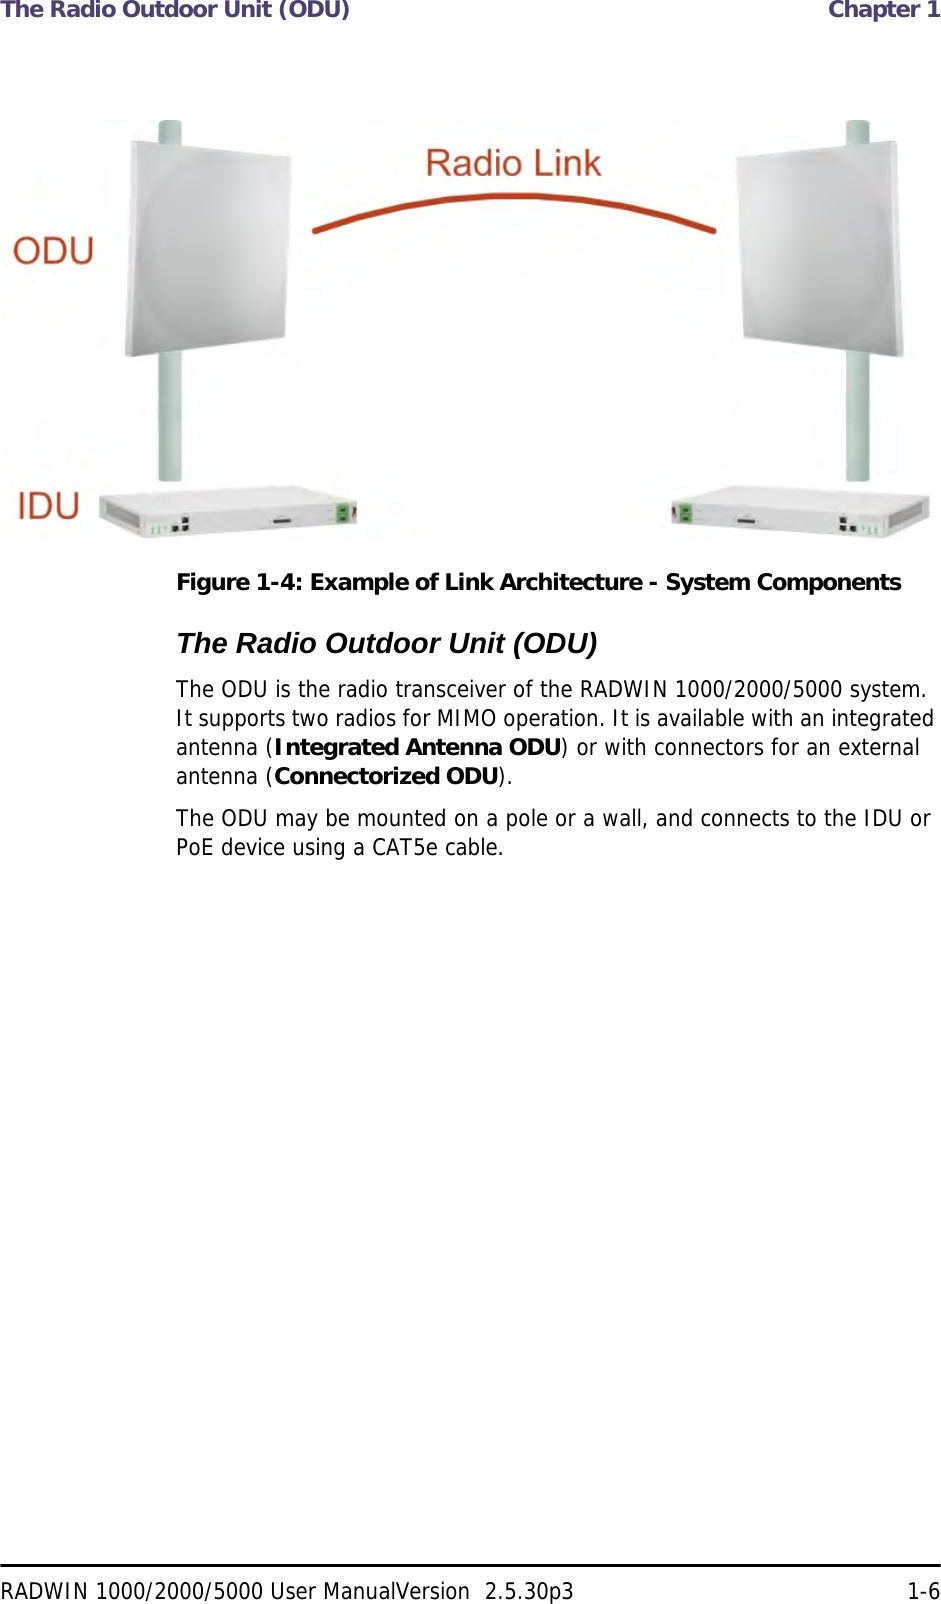 The Radio Outdoor Unit (ODU)  Chapter 1RADWIN 1000/2000/5000 User ManualVersion  2.5.30p3 1-6Figure 1-4: Example of Link Architecture - System ComponentsThe Radio Outdoor Unit (ODU)The ODU is the radio transceiver of the RADWIN 1000/2000/5000 system. It supports two radios for MIMO operation. It is available with an integrated antenna (Integrated Antenna ODU) or with connectors for an external antenna (Connectorized ODU).The ODU may be mounted on a pole or a wall, and connects to the IDU or PoE device using a CAT5e cable.